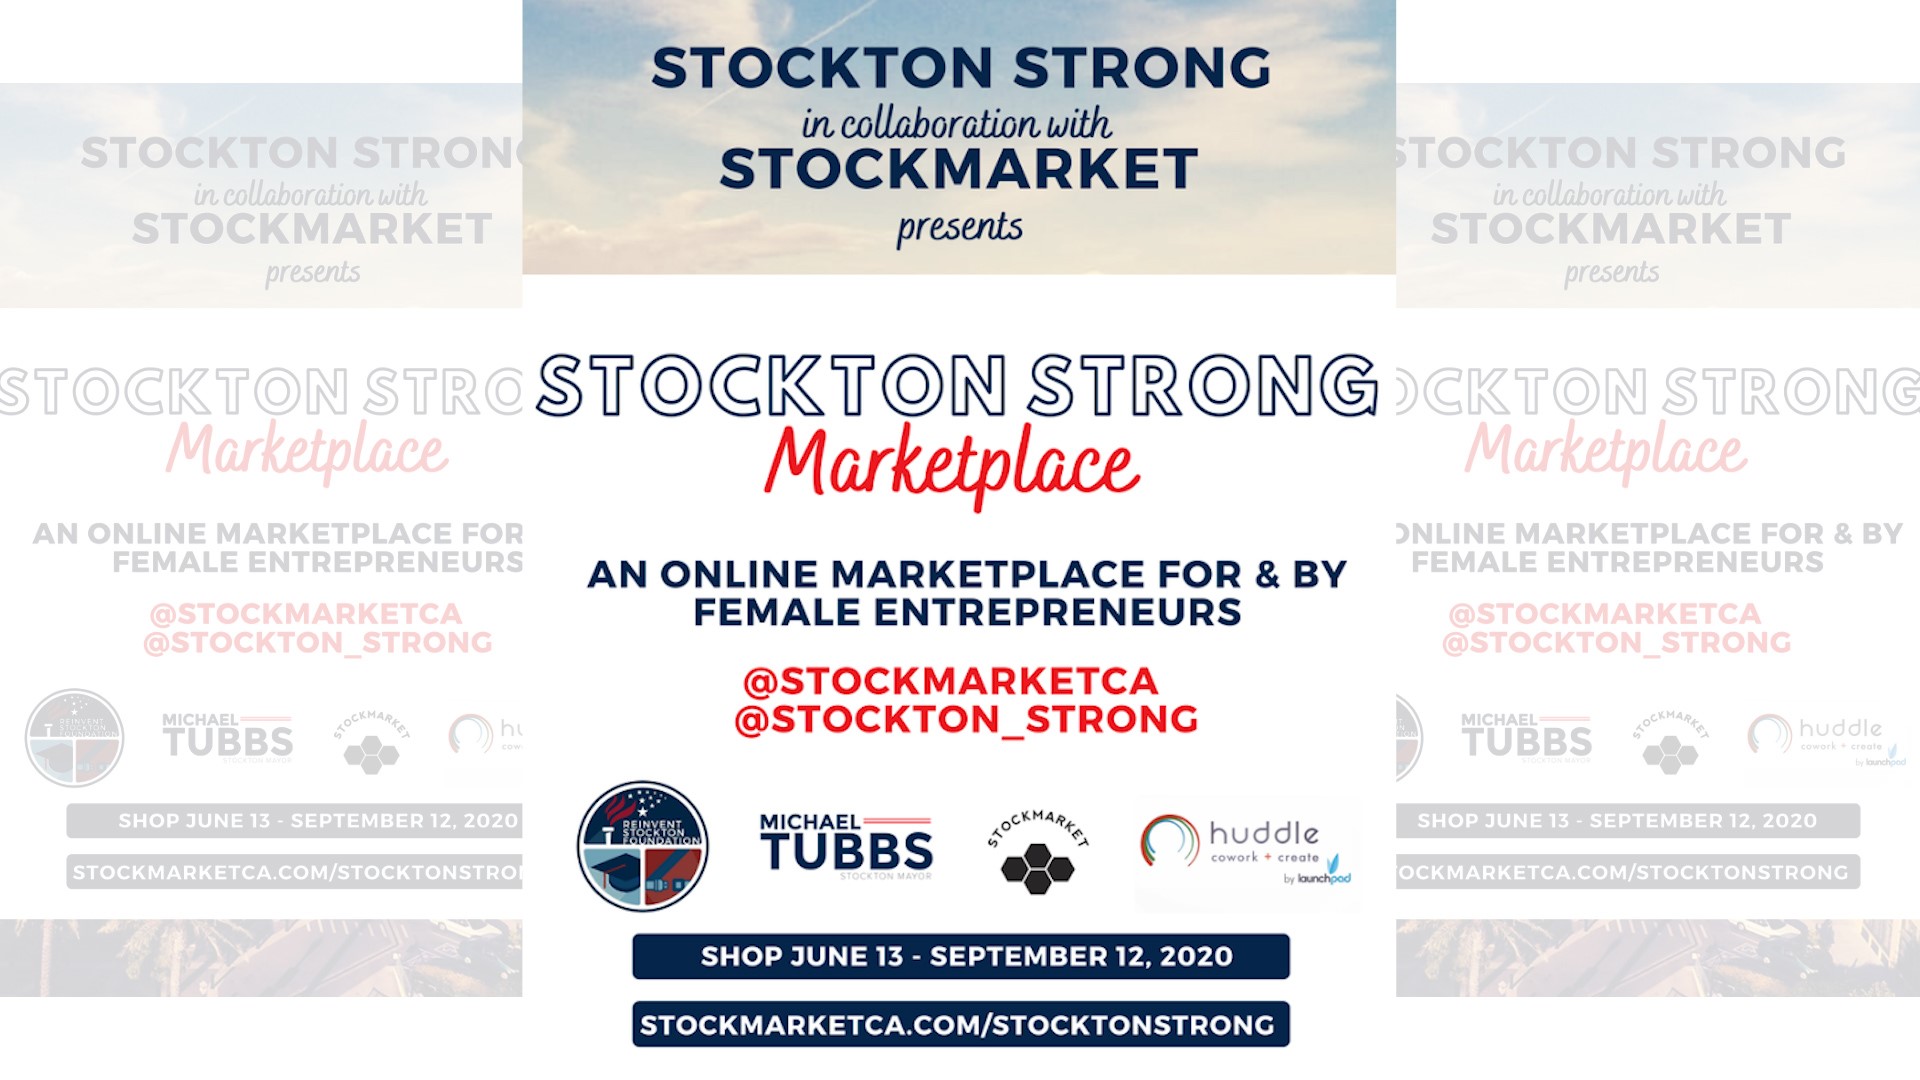 Stockton Strong Marketplace is an online space for local, female entrepreneurs to showcase their work.